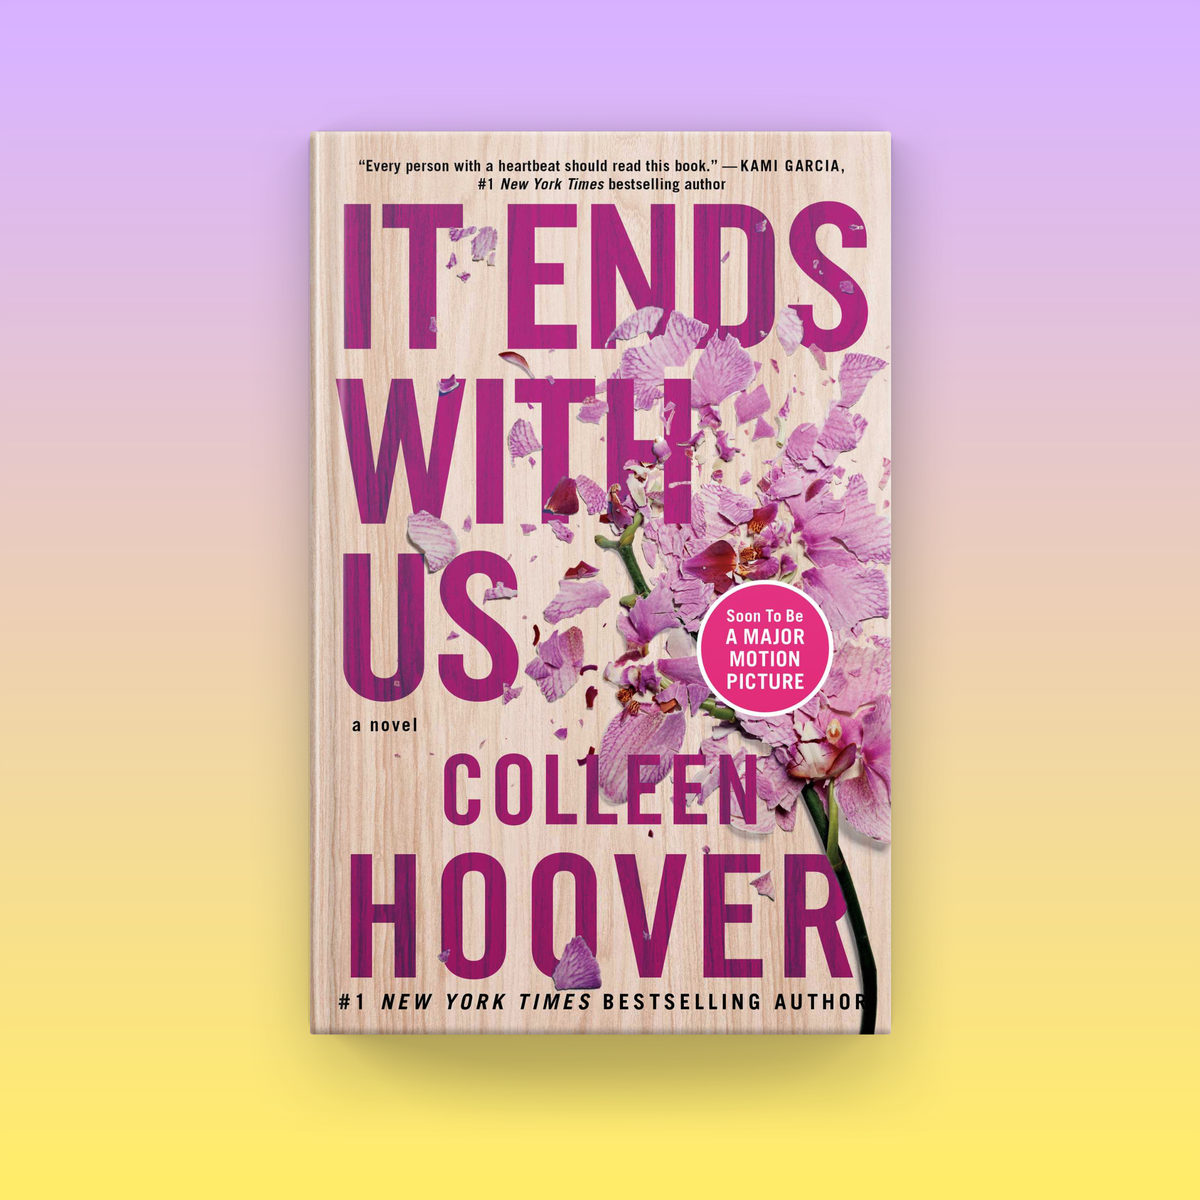 It’s going to be a sobby summer thanks to @ColleenHoover. 😭 Grab your tissues and catch up on It Ends With Us before it hits theaters. 🌸 apple.co/ColleenHoover